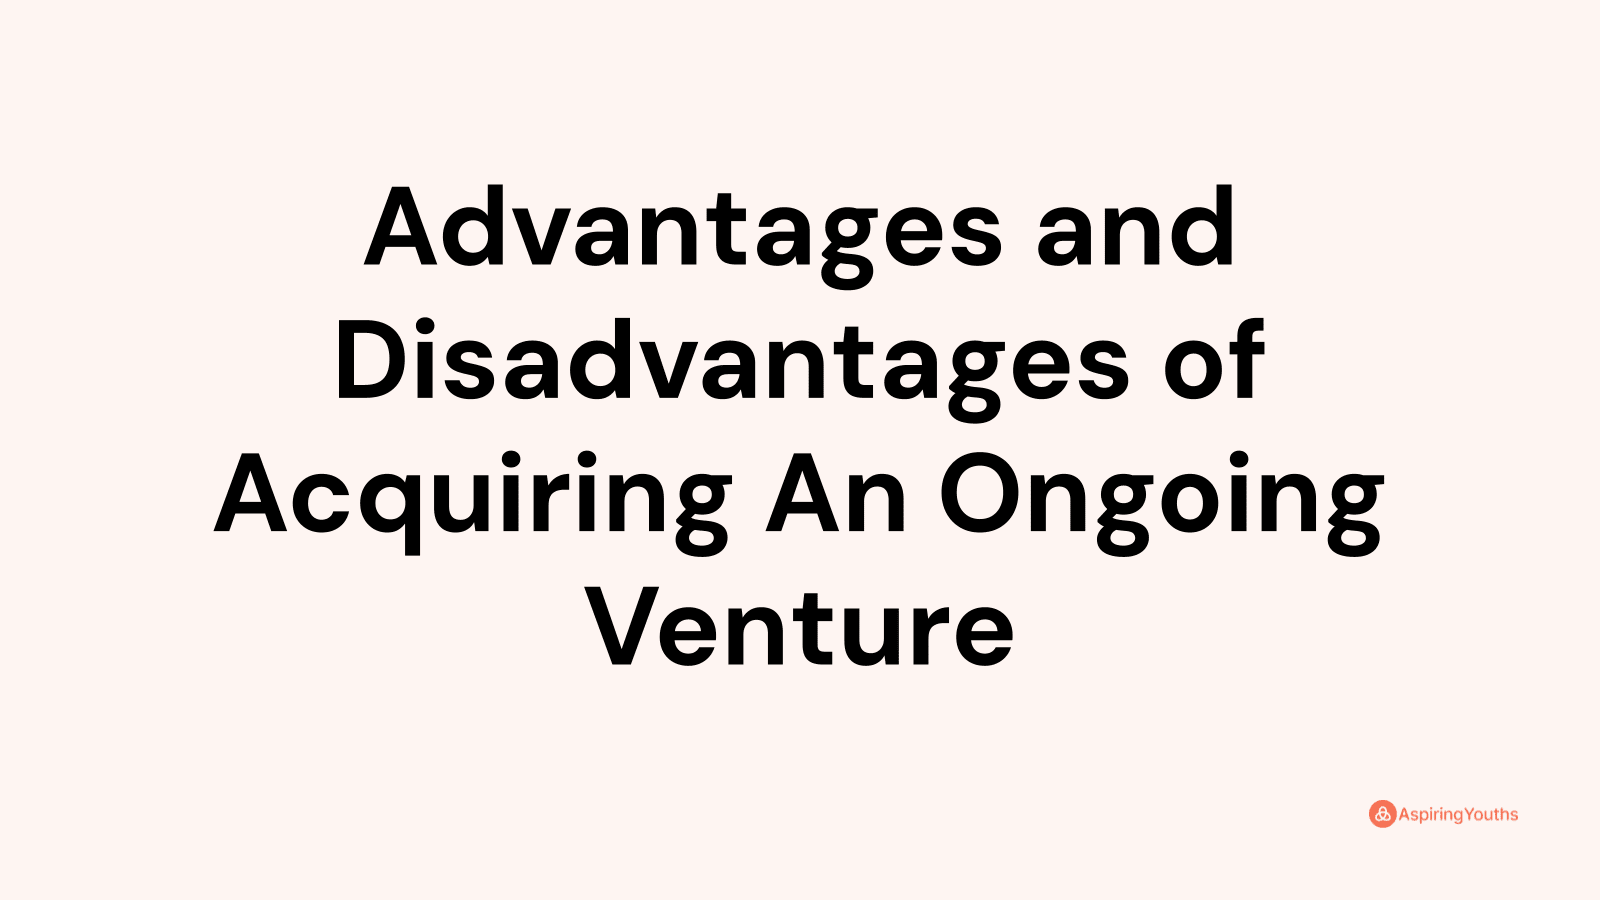 Advantages and disadvantages of Acquiring An Ongoing Venture